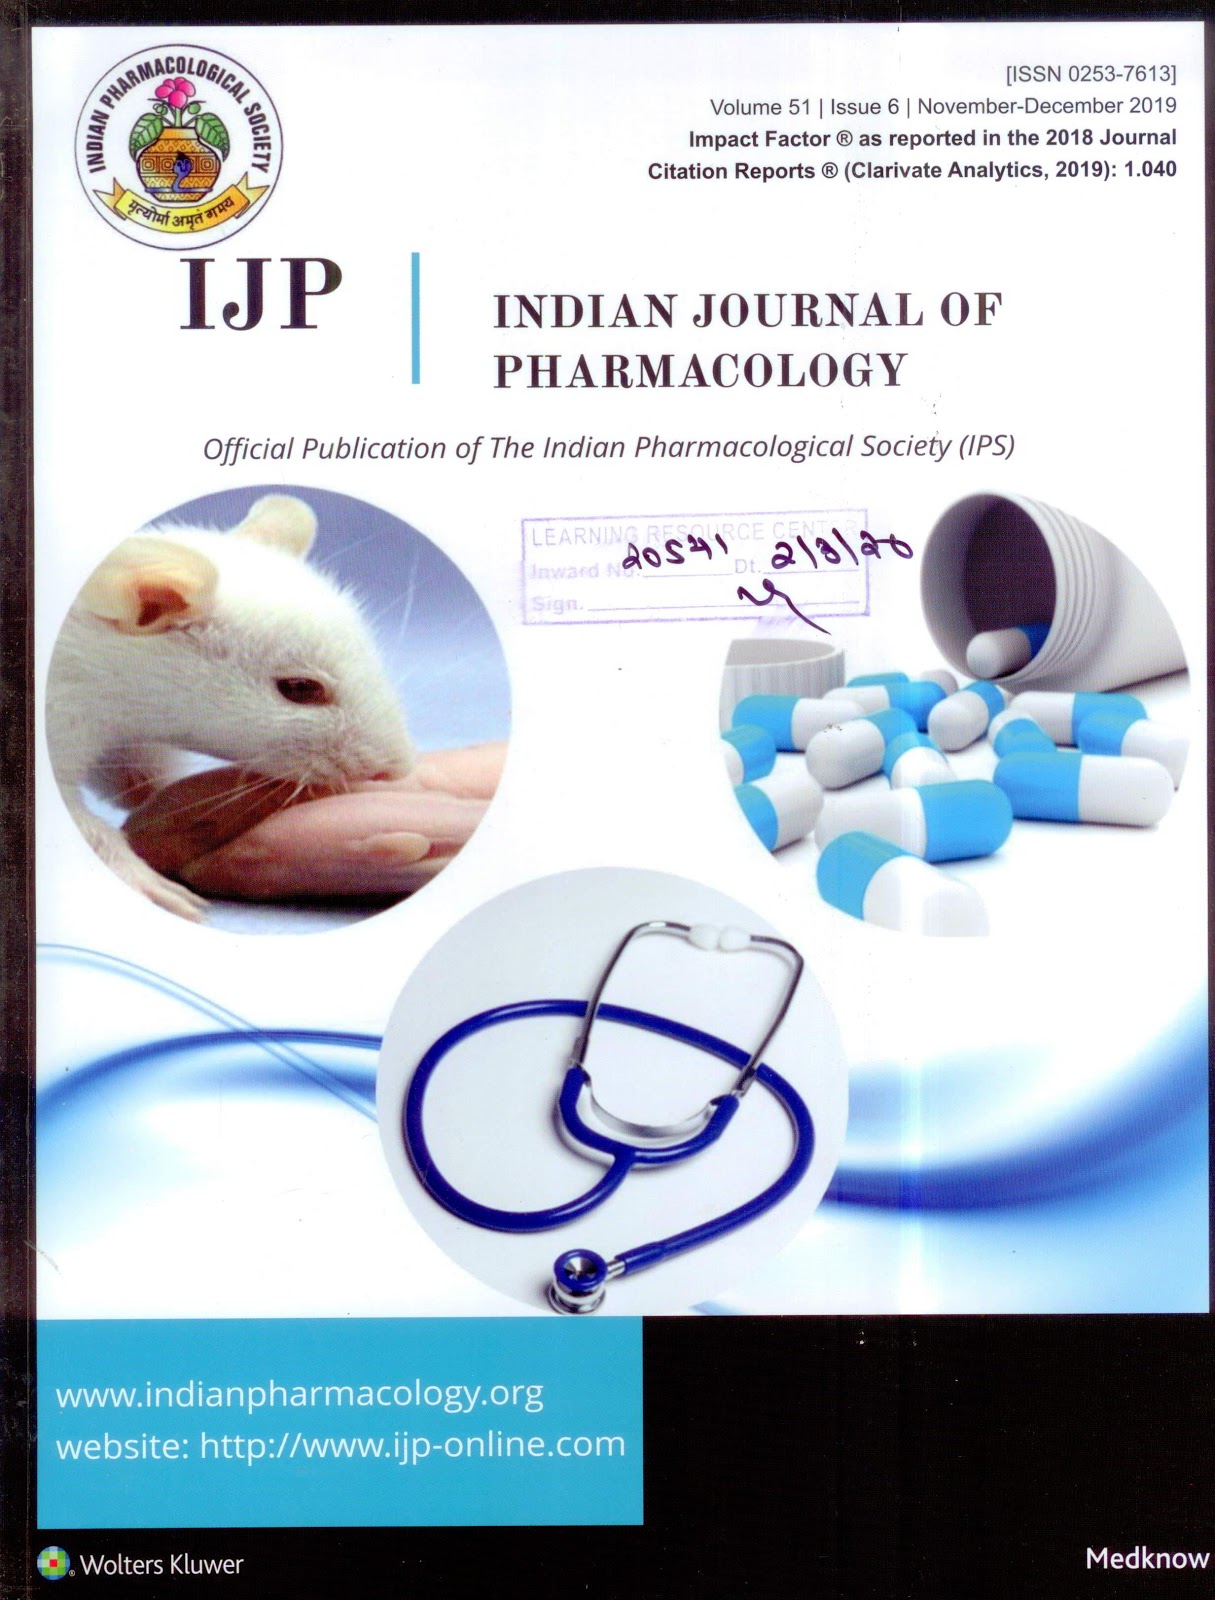 http://www.ijp-online.com/showBackIssue.asp?issn=0253-7613;year=2019;volume=51;issue=6;month=November-December